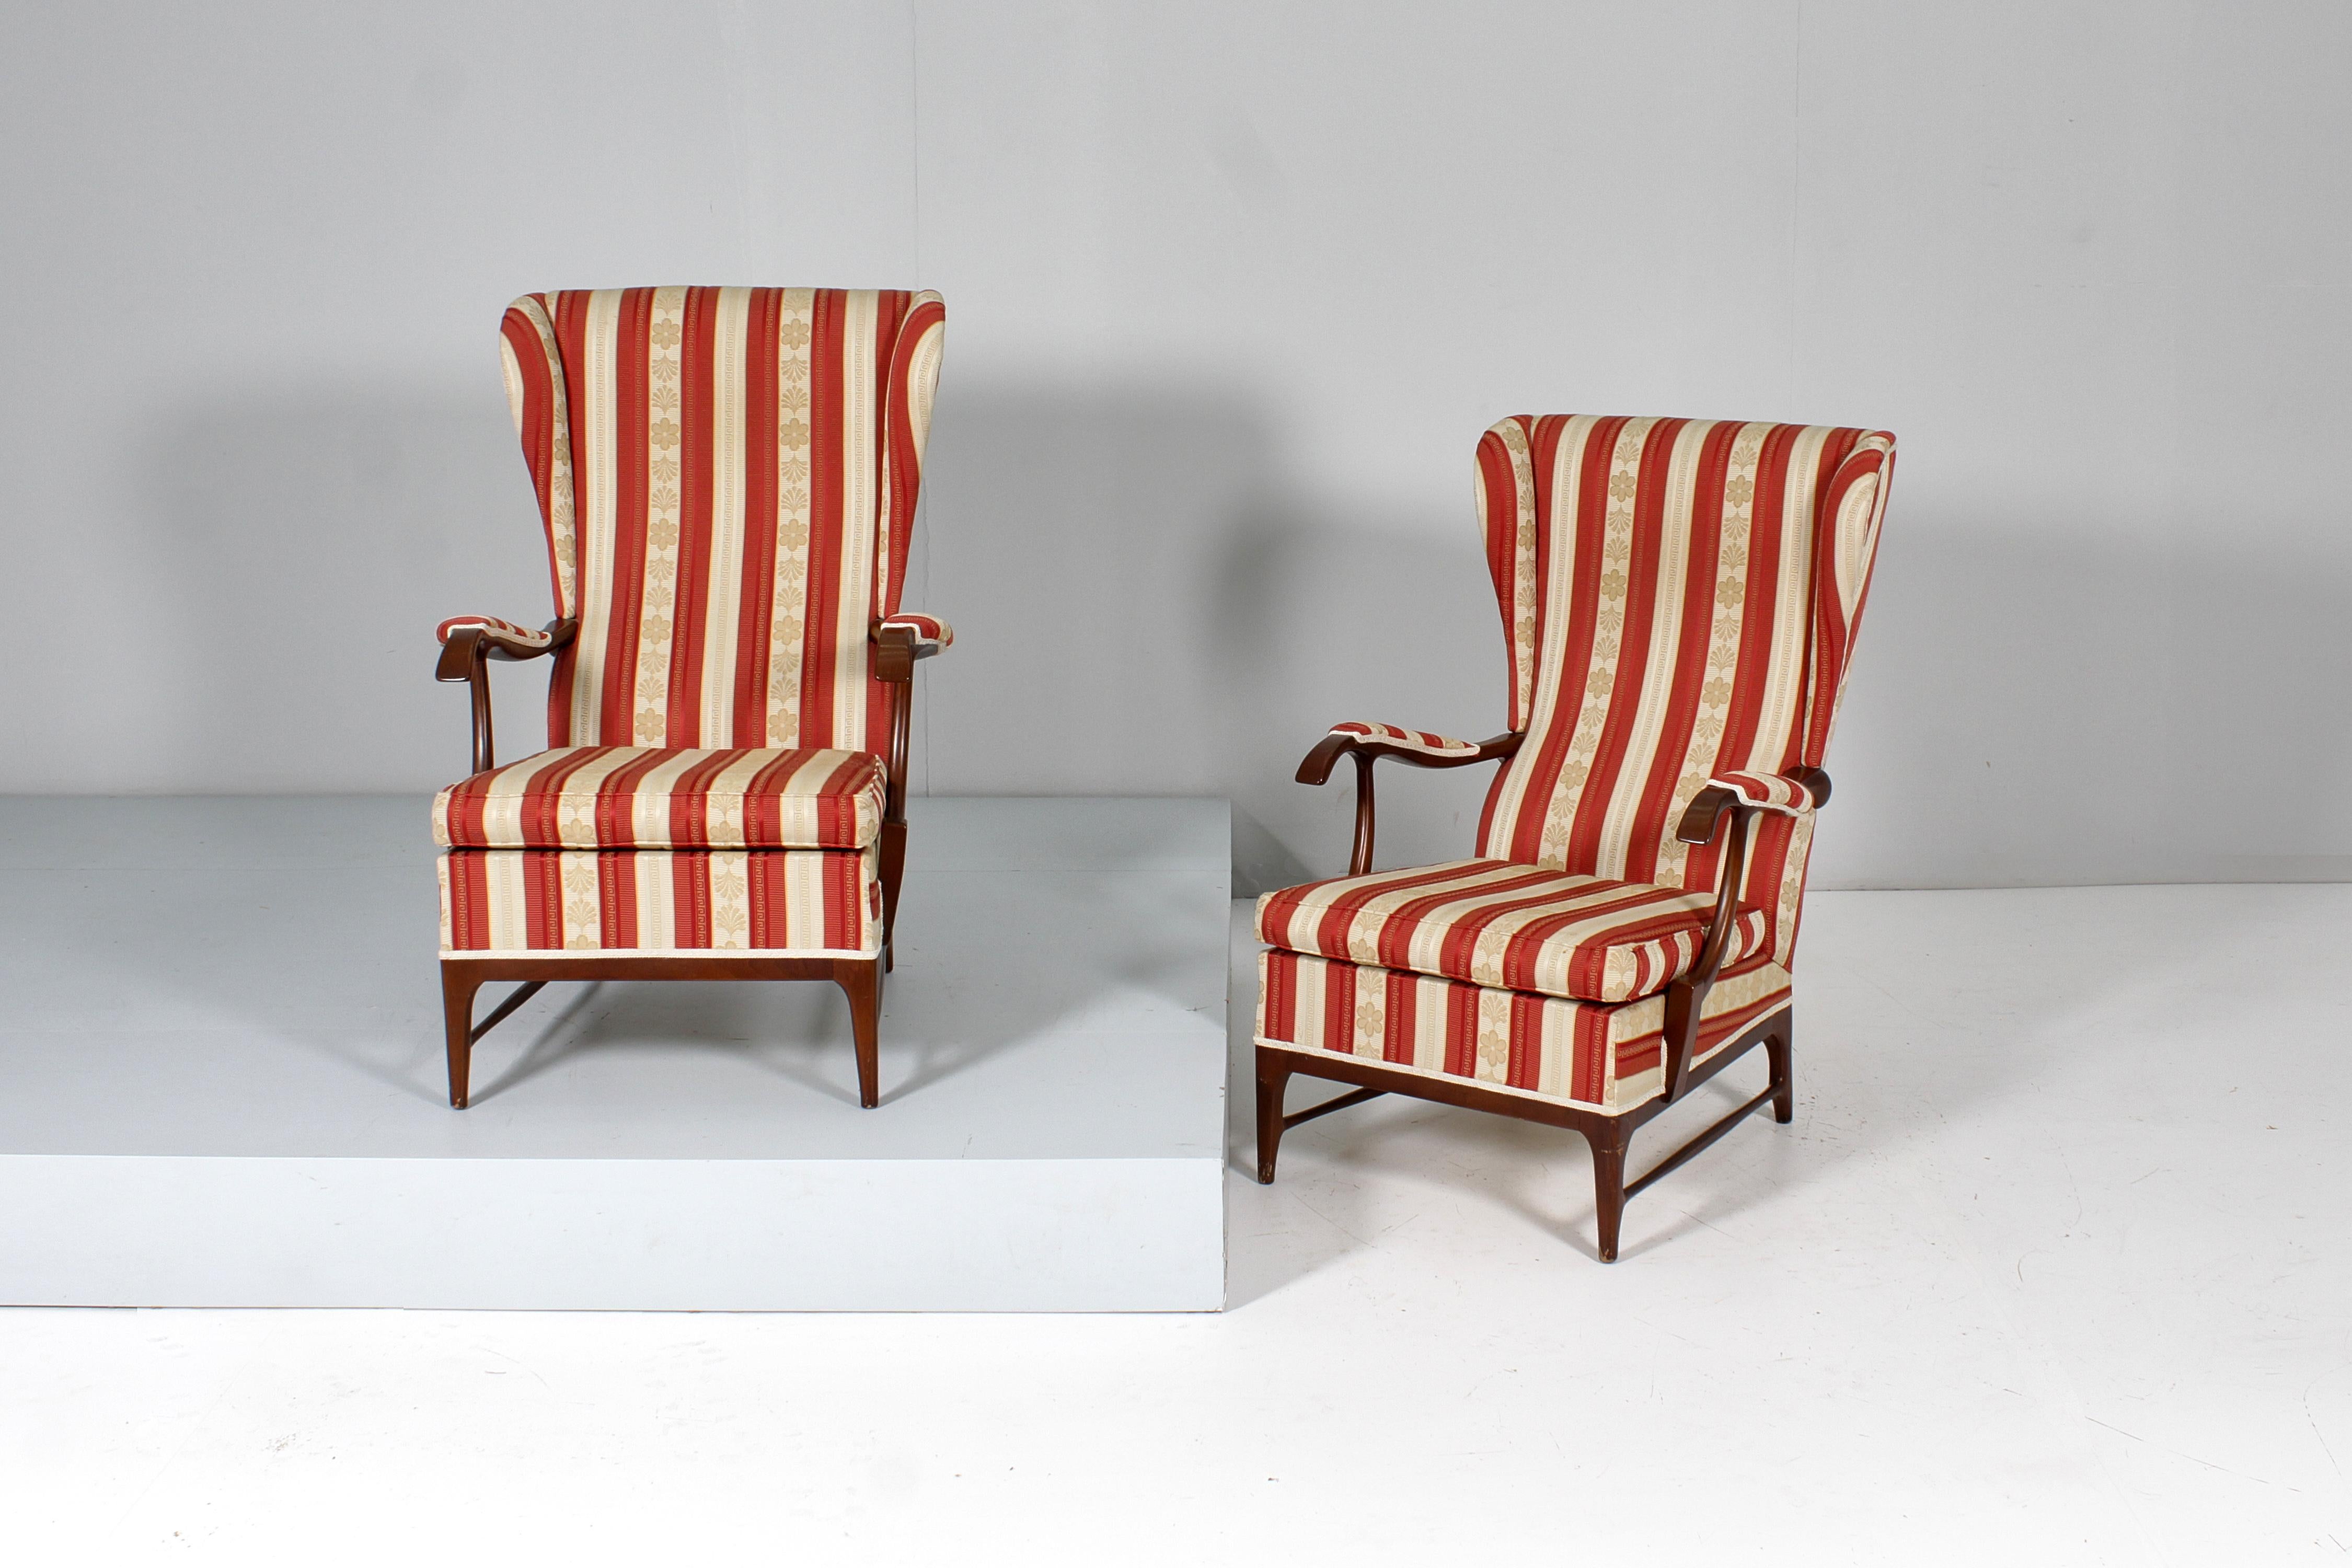 Very Stylish set of 2 armchairs with wooden structure and curved arms, covered in white satin with red striped pattern and gold decorations. Italian production by Paolo Buffa for Frama, Italy 1960s.
Wear consistent with age and use.